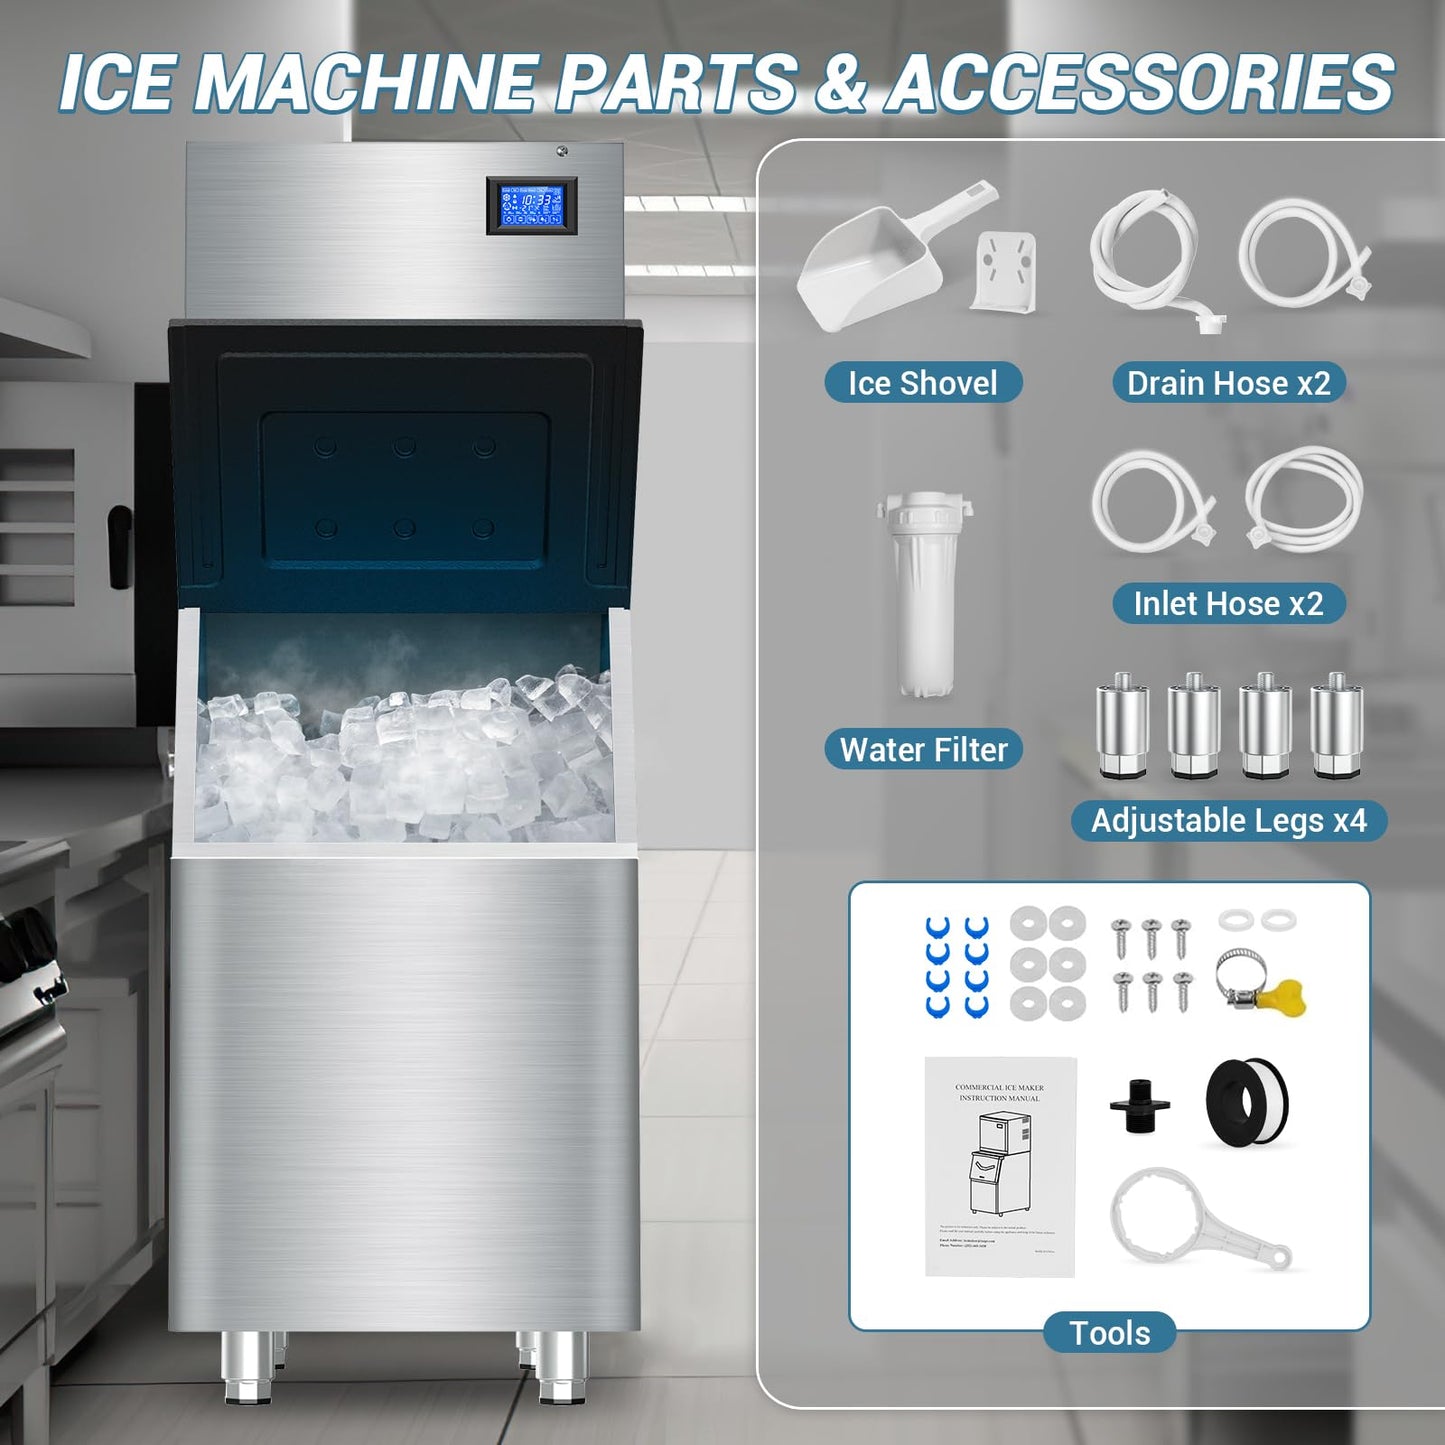 Large Commercial Ice Maker Machine: 500lbs/24H Production, with 350lbs Ice Storage Bucket, 156 Ice Cubes in 6-15 Mins - Stainless Steel Industrial Ice Maker for Restaurant, Bar, Cafe, Commercial Use